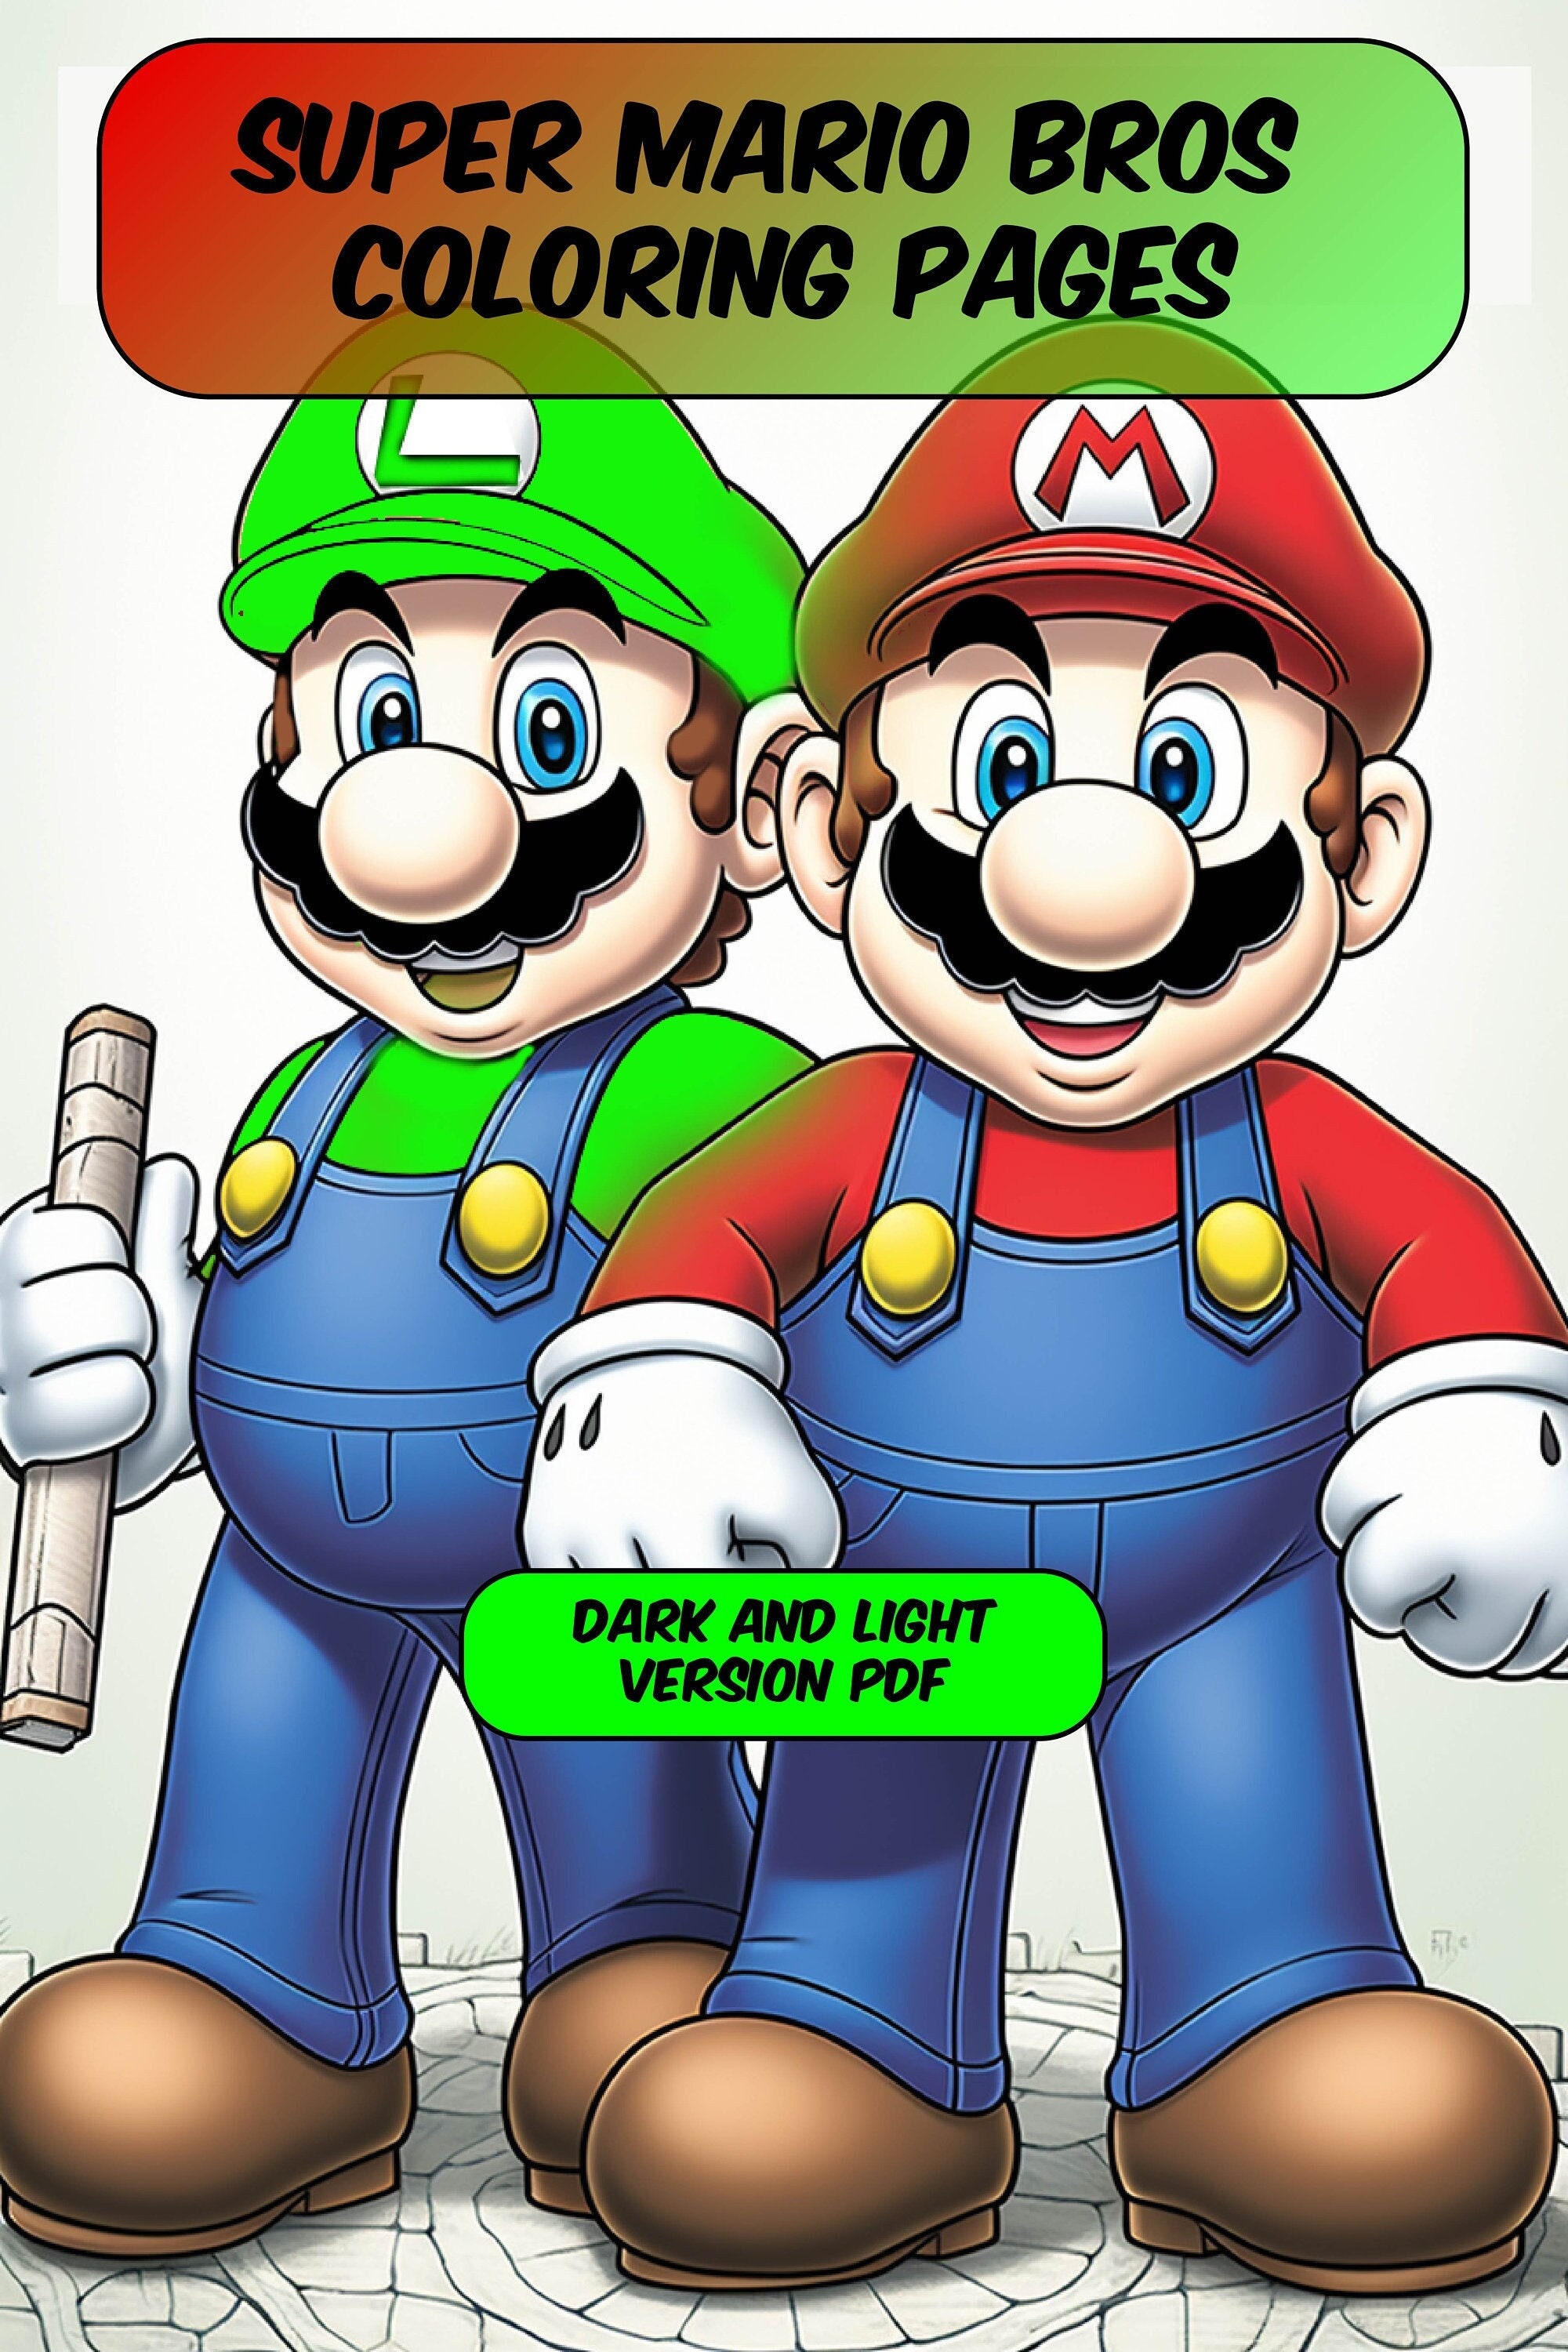 super mario here we goo!! : super mario coloring book / 50+ Illustrations  Mario Brothers Coloring Books for Kids / Ideal Gift For Those Who Love  Super Mario Bros / 50 pages / 8.5*11 inches (Paperback) 